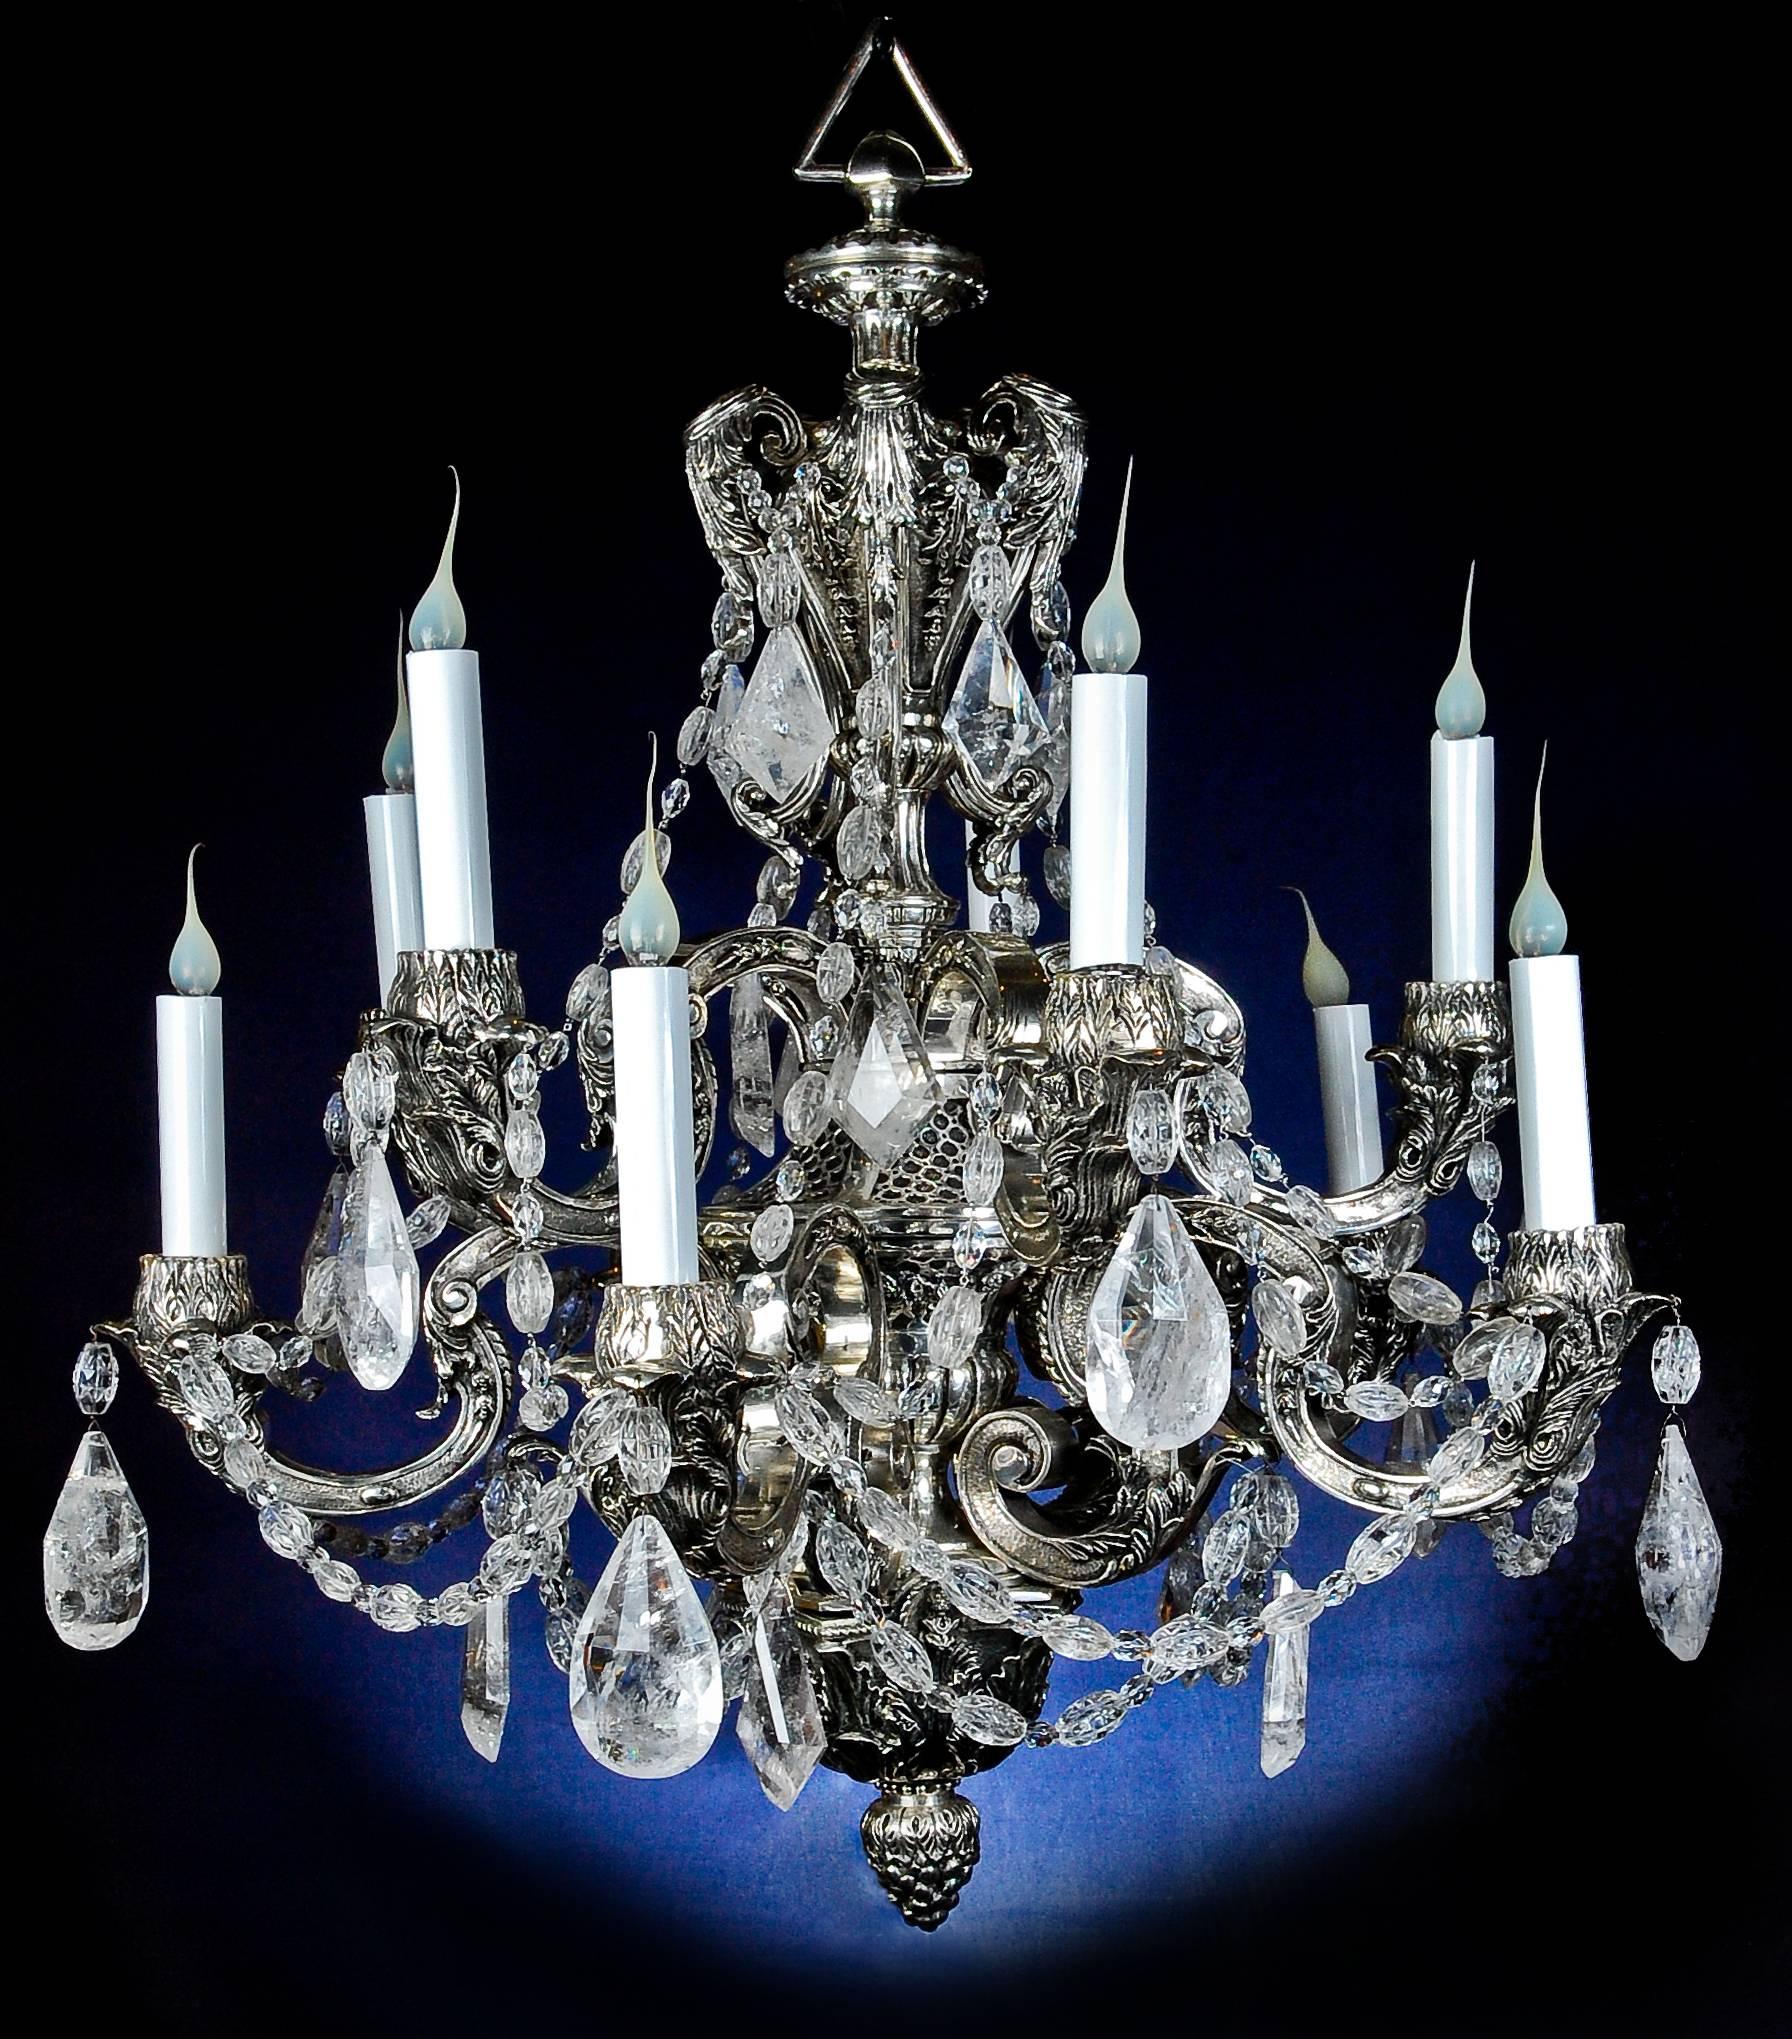 A fine antique French Louis XVI style silvered bronze, cut rock crystal and cut crystal multi light double-tier chandelier embellished with large cut rock crystal prisms and cut crystal chains.